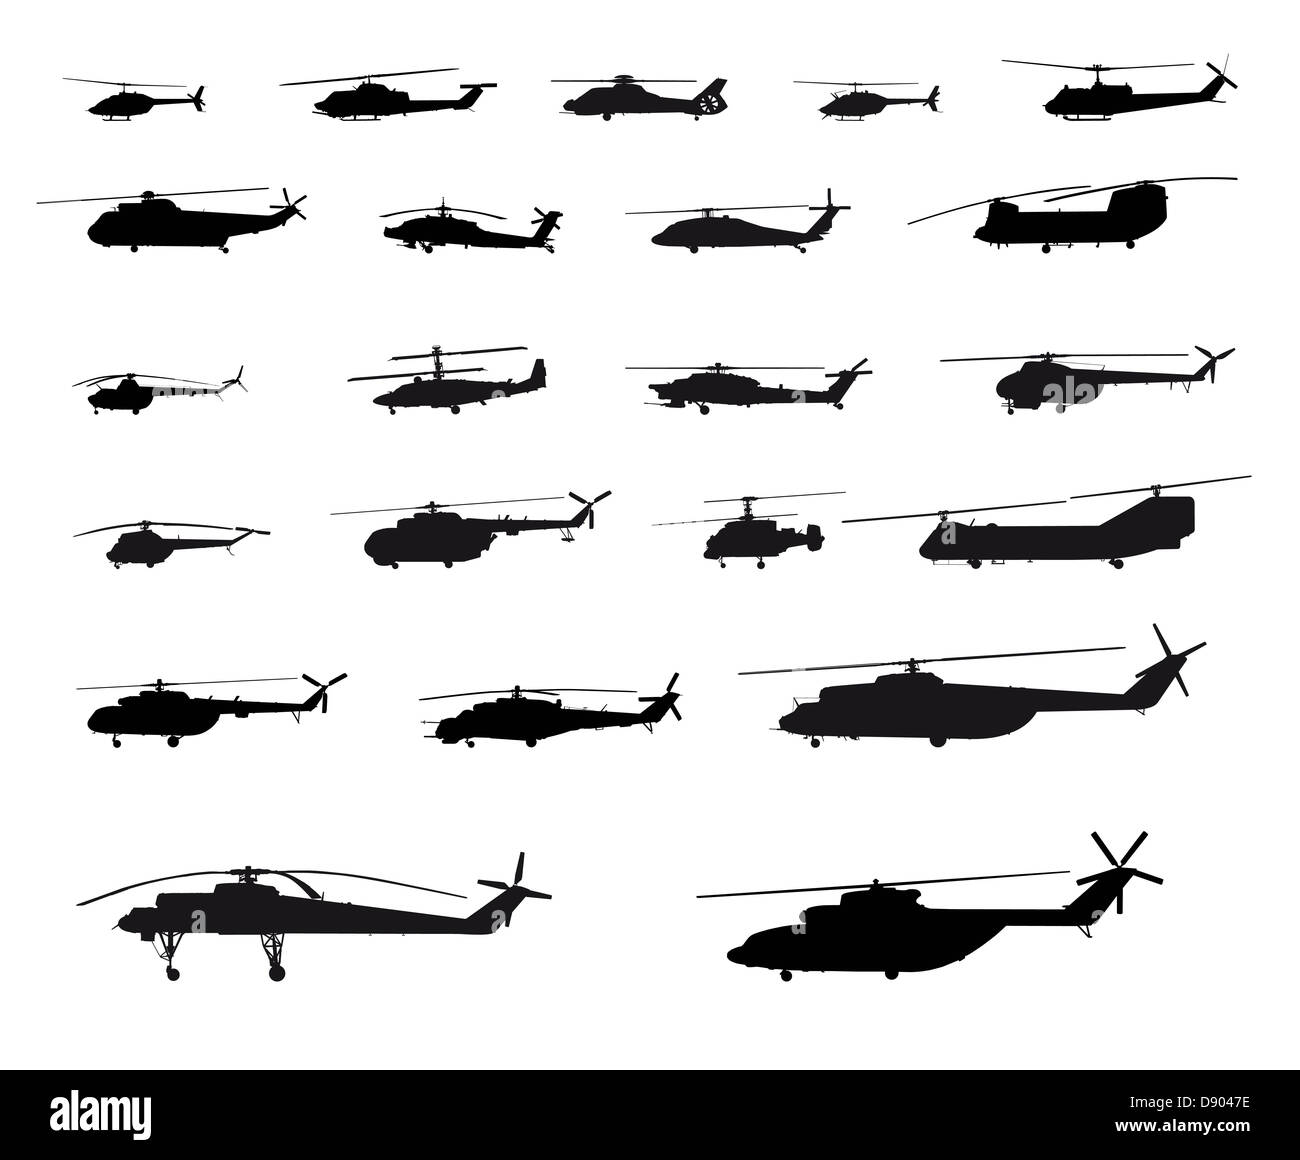 Silhouette Of Helicopters Stock Photo